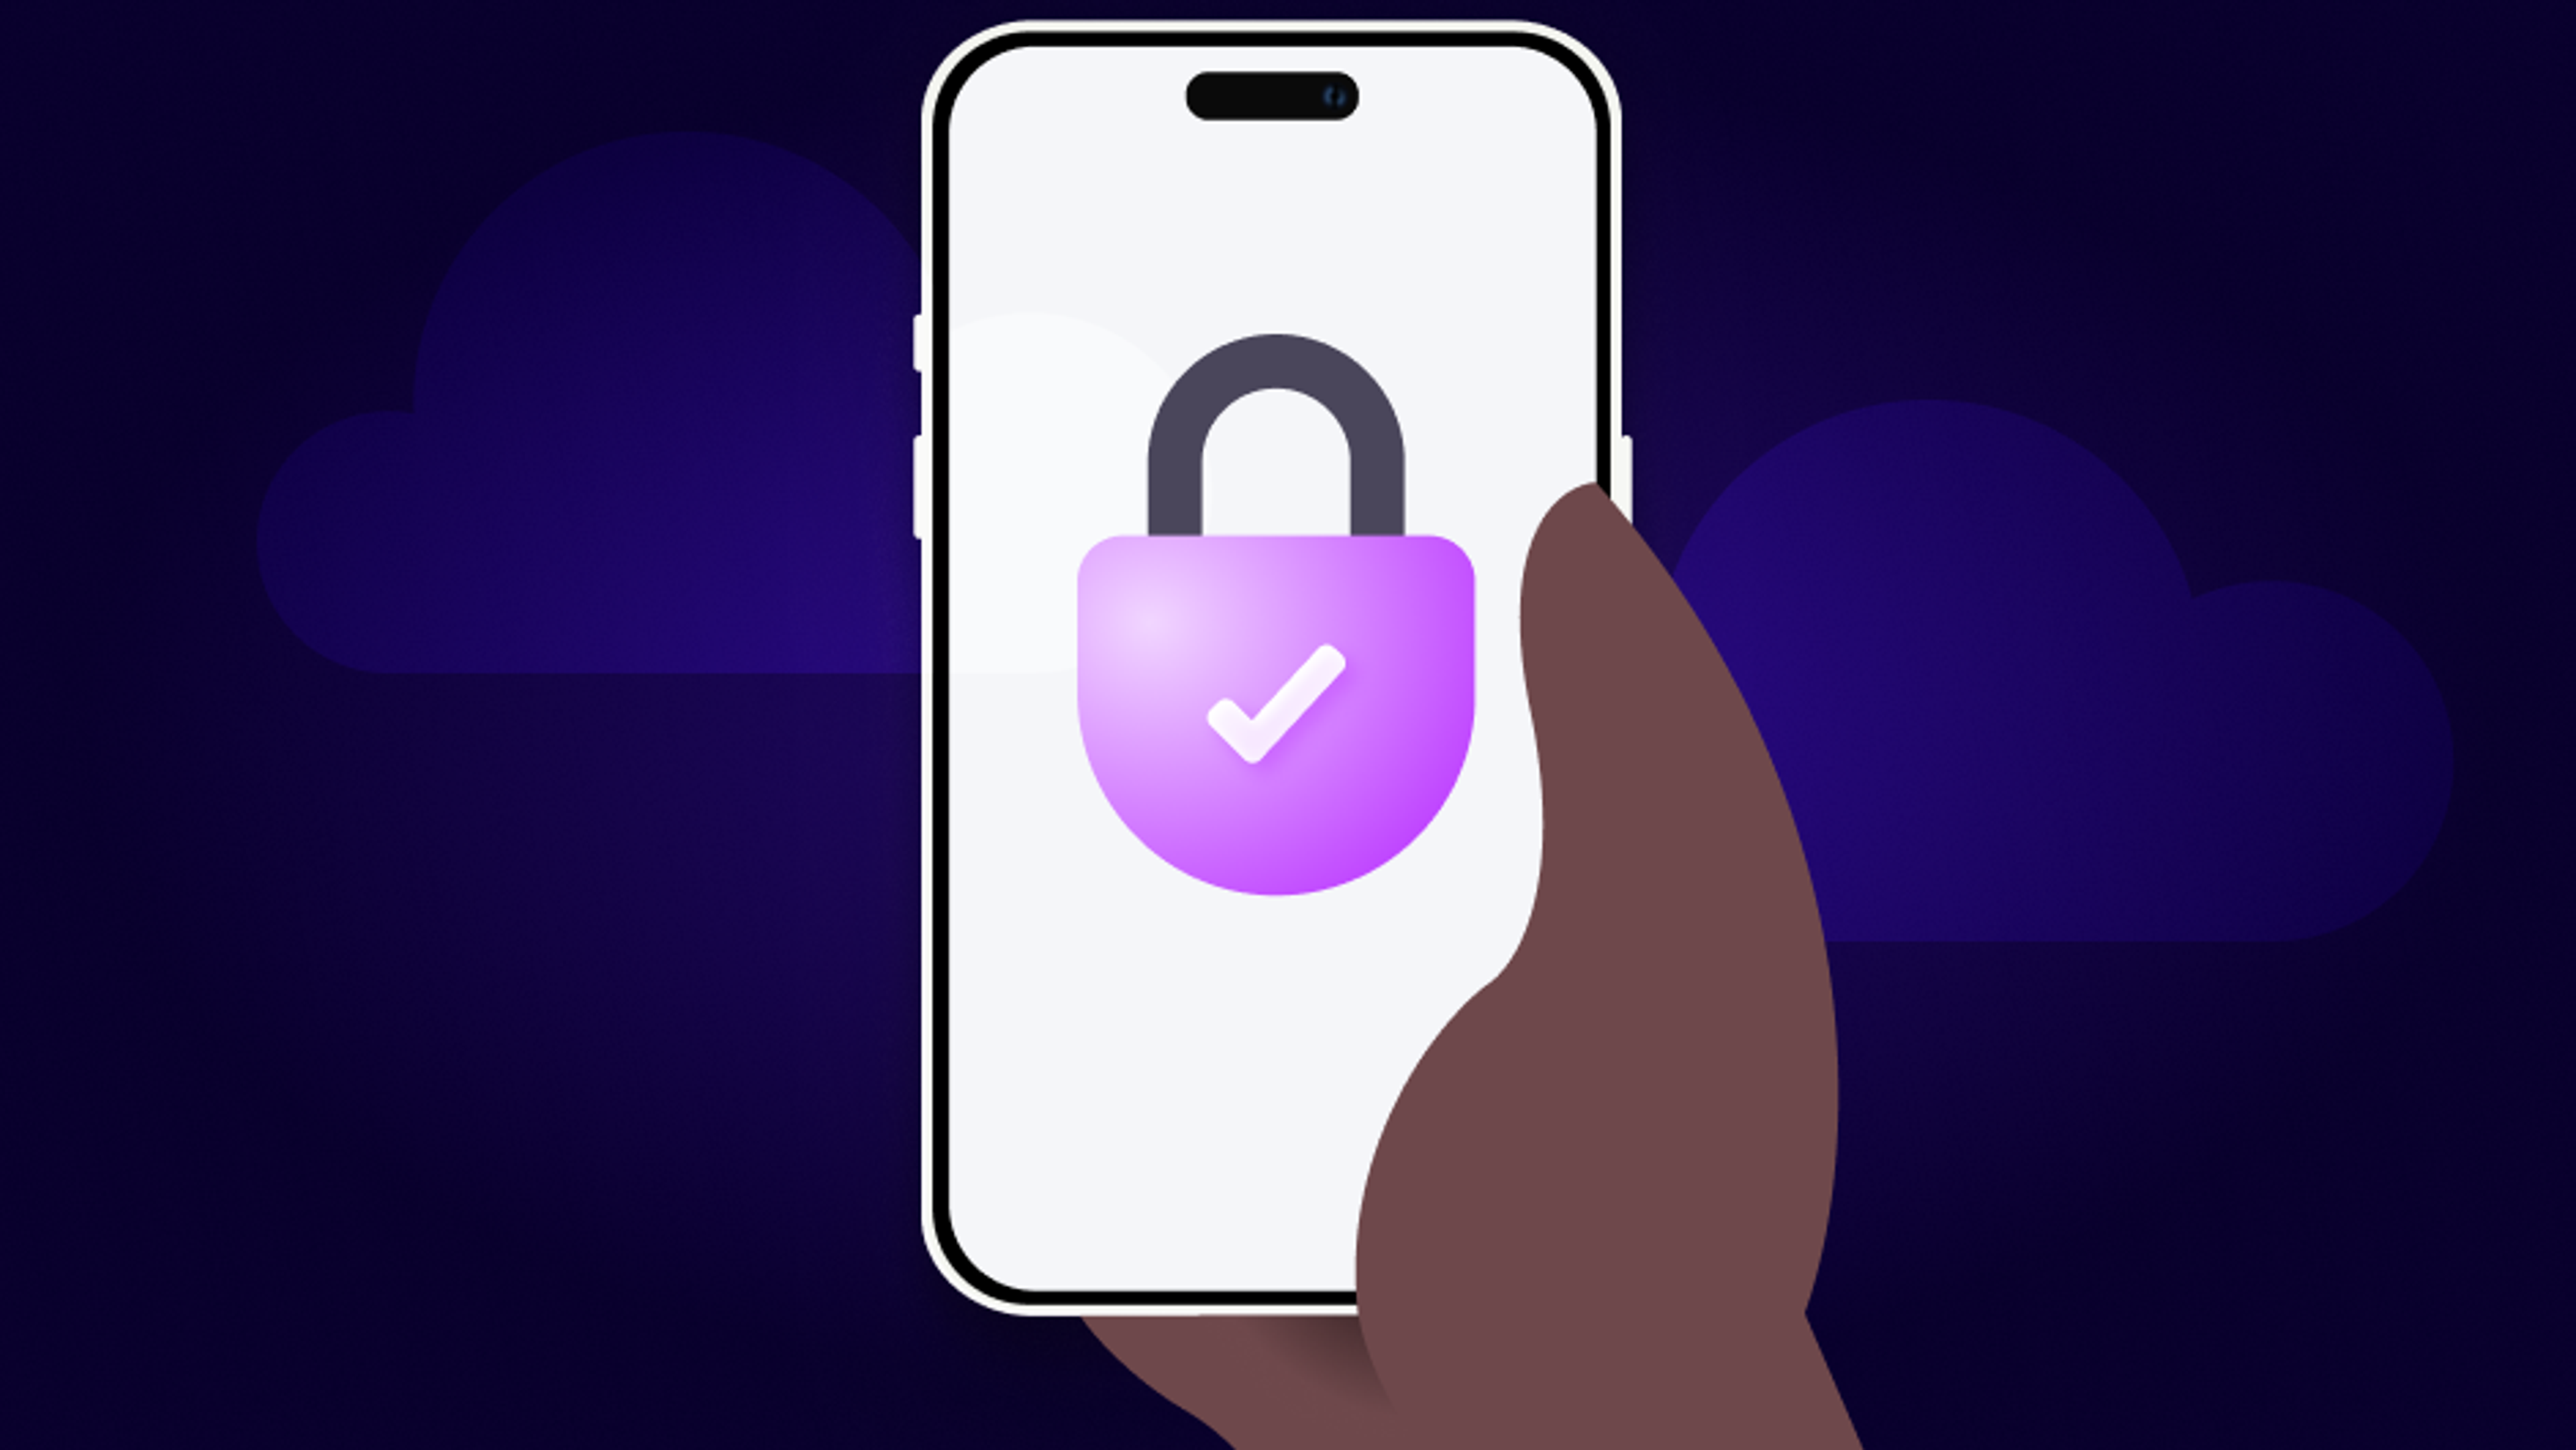 Zego illustration of phone with a secure padlock symbol